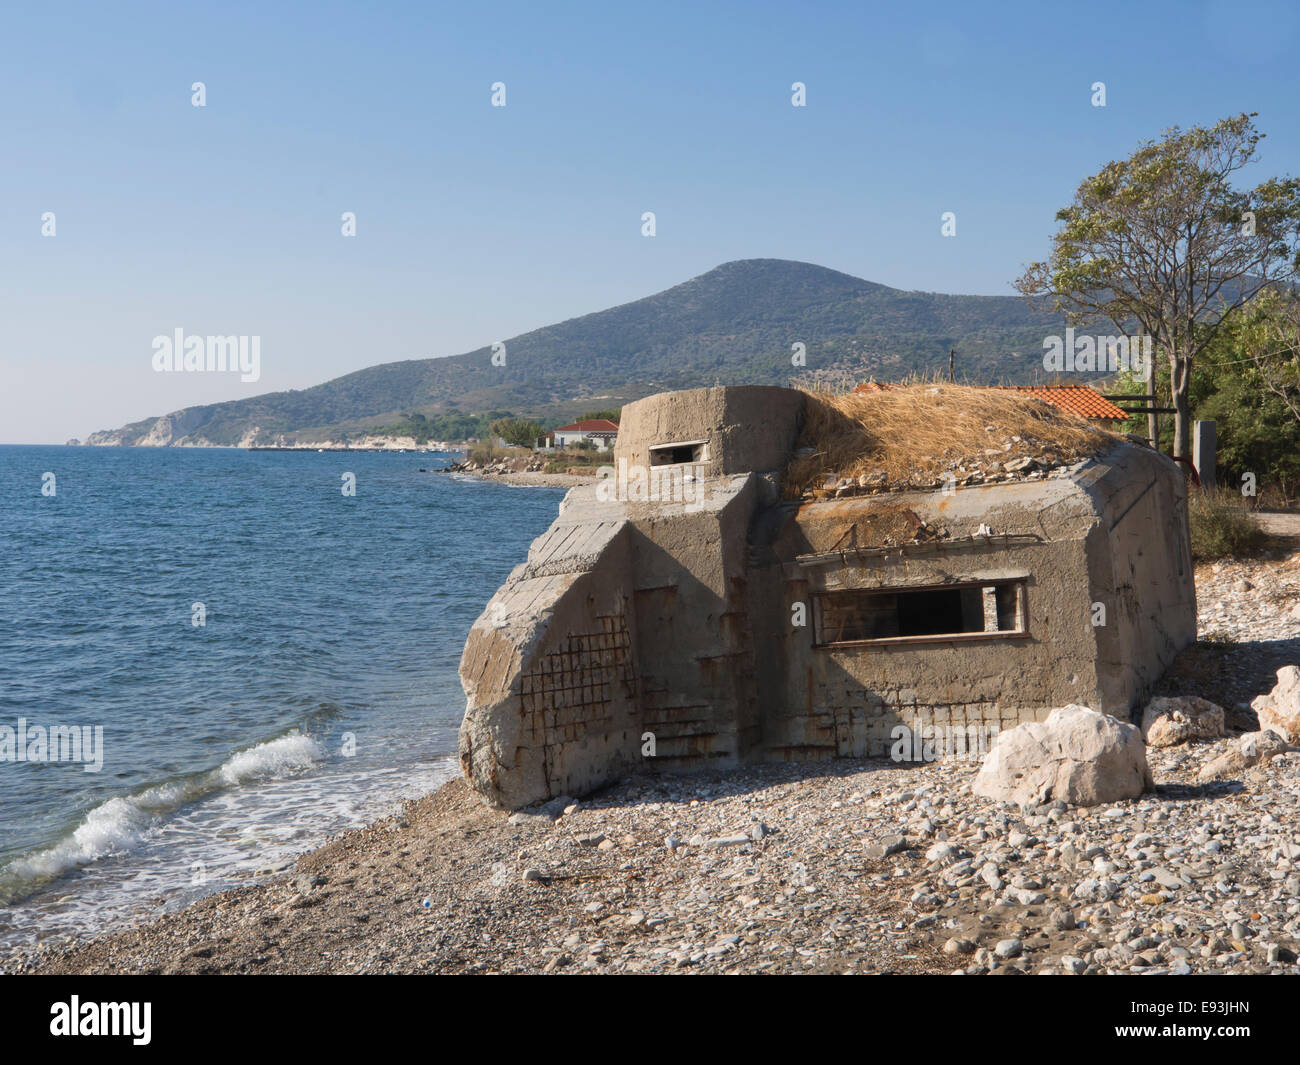 Wartime bunker on the beach of the island of Samos in Greece, ruin of defense line Stock Photo